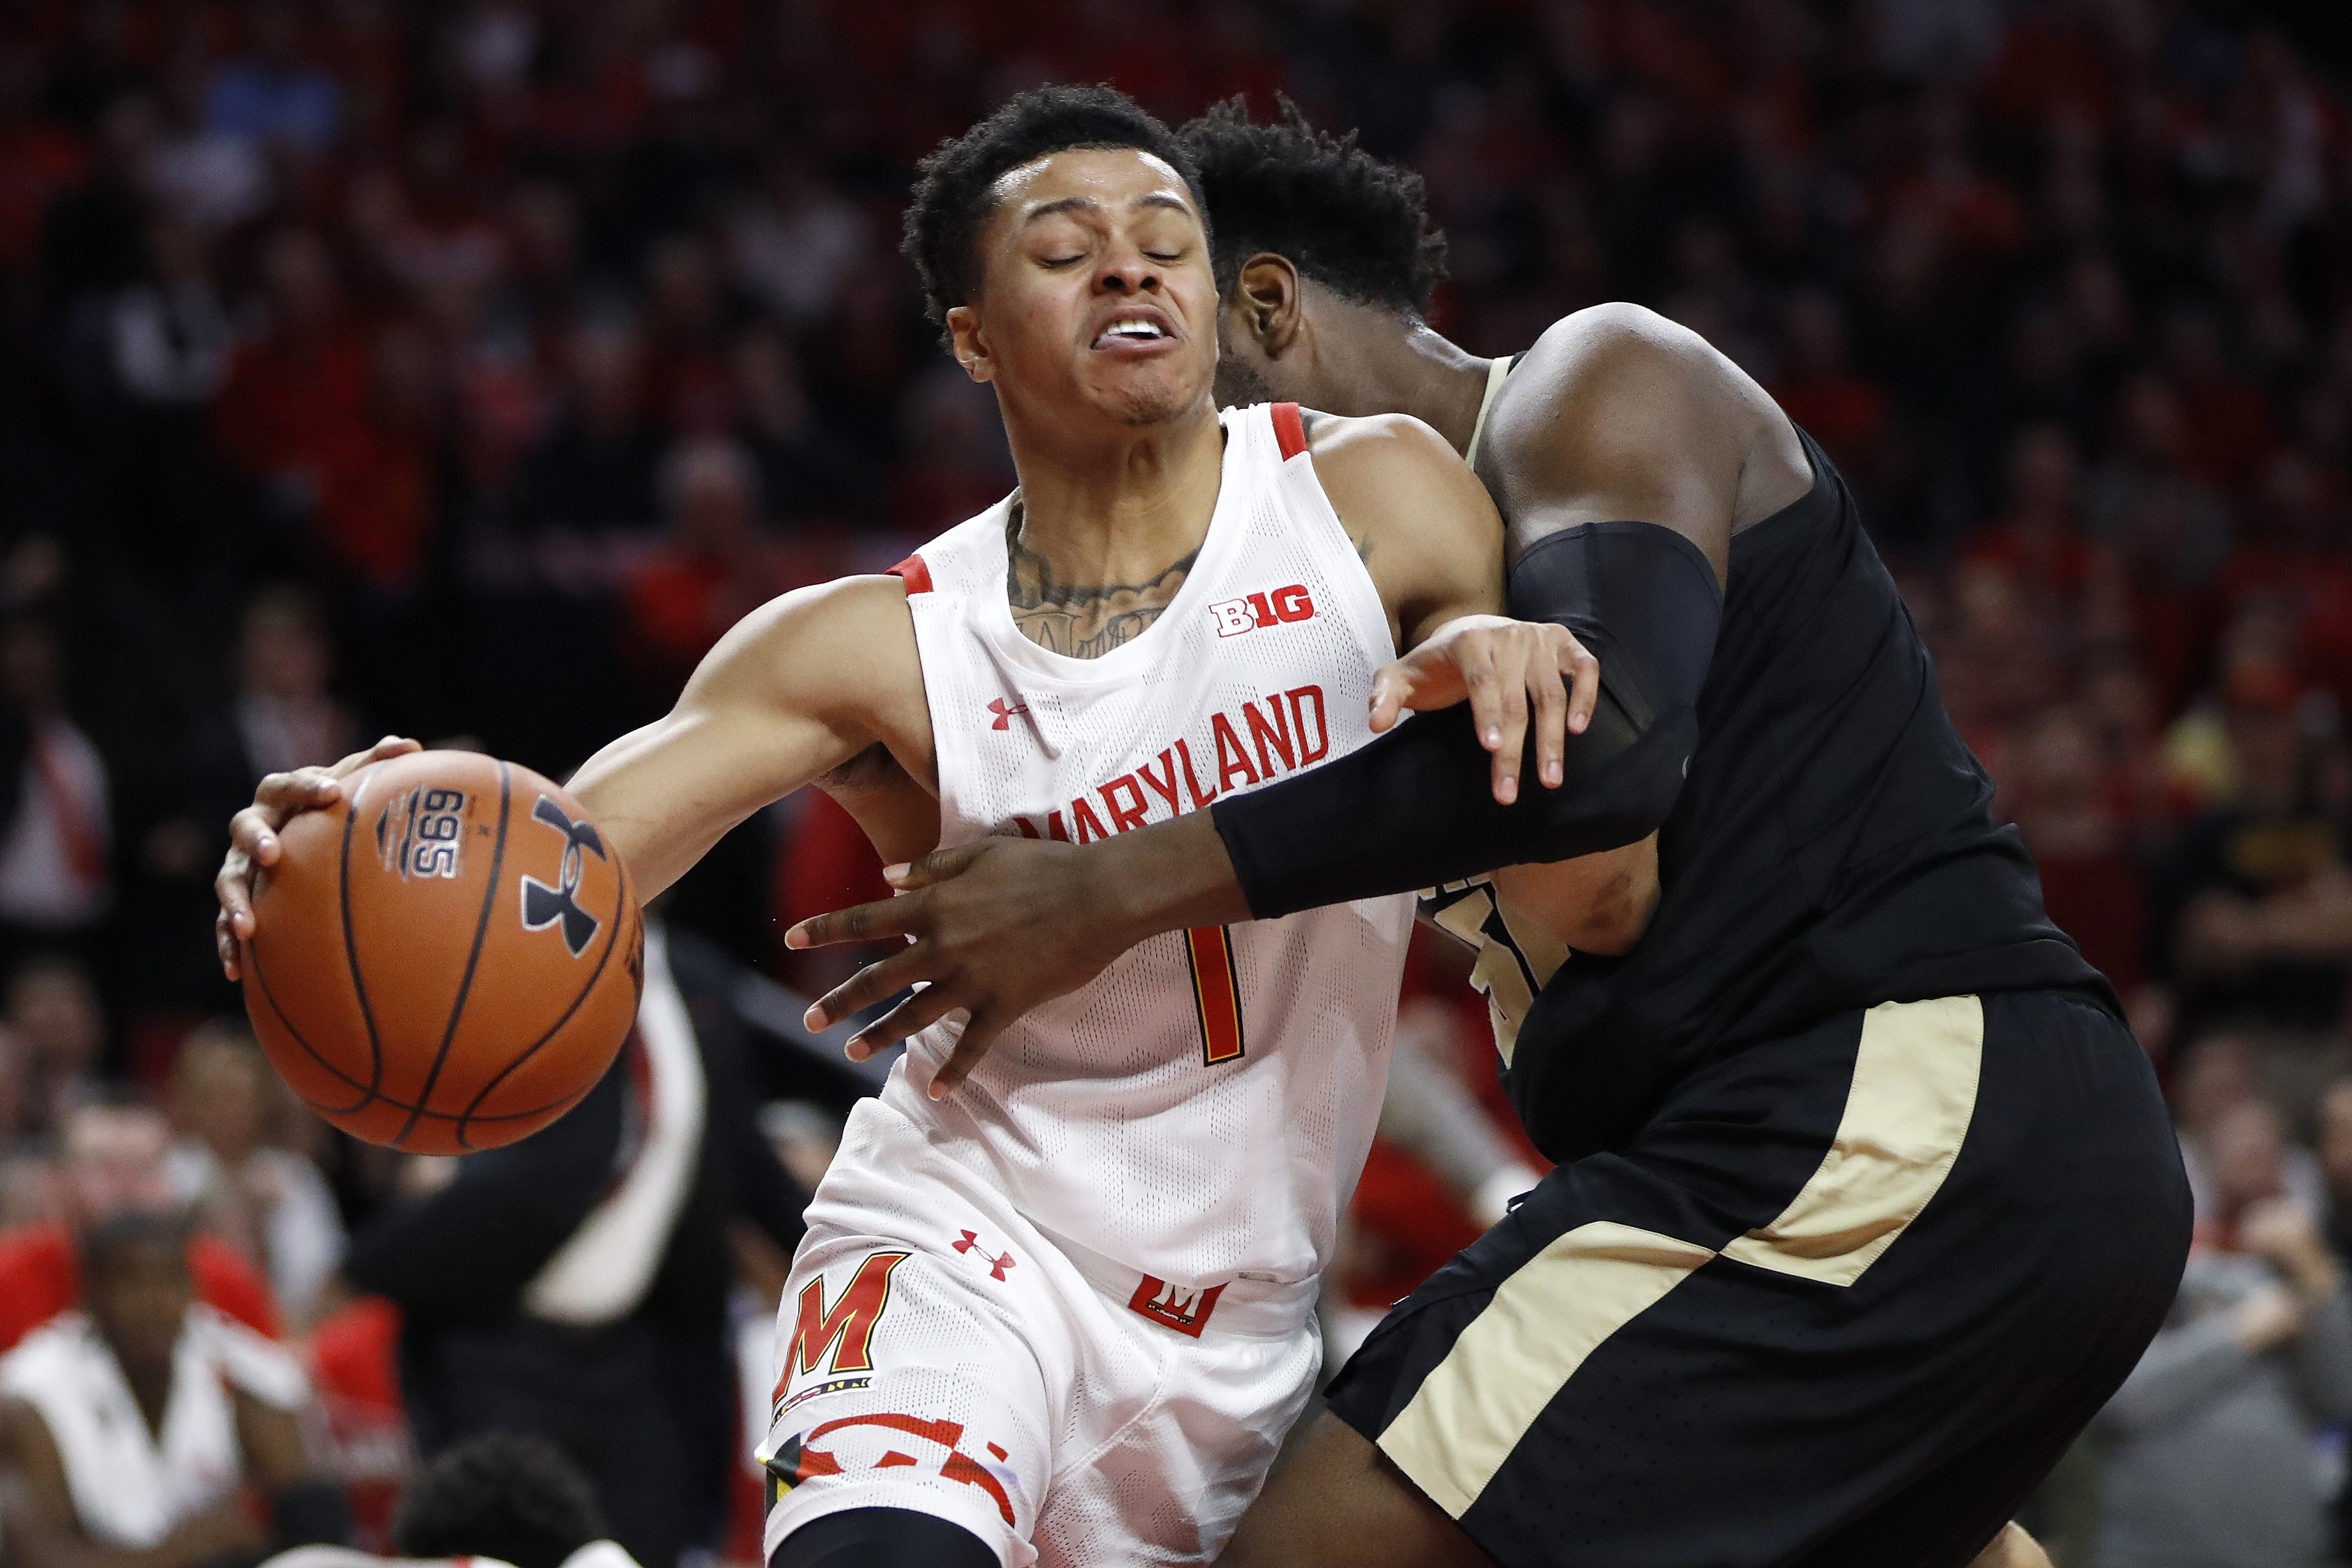 Smith scores 18 and No. 17 Maryland holds off Purdue 57-50